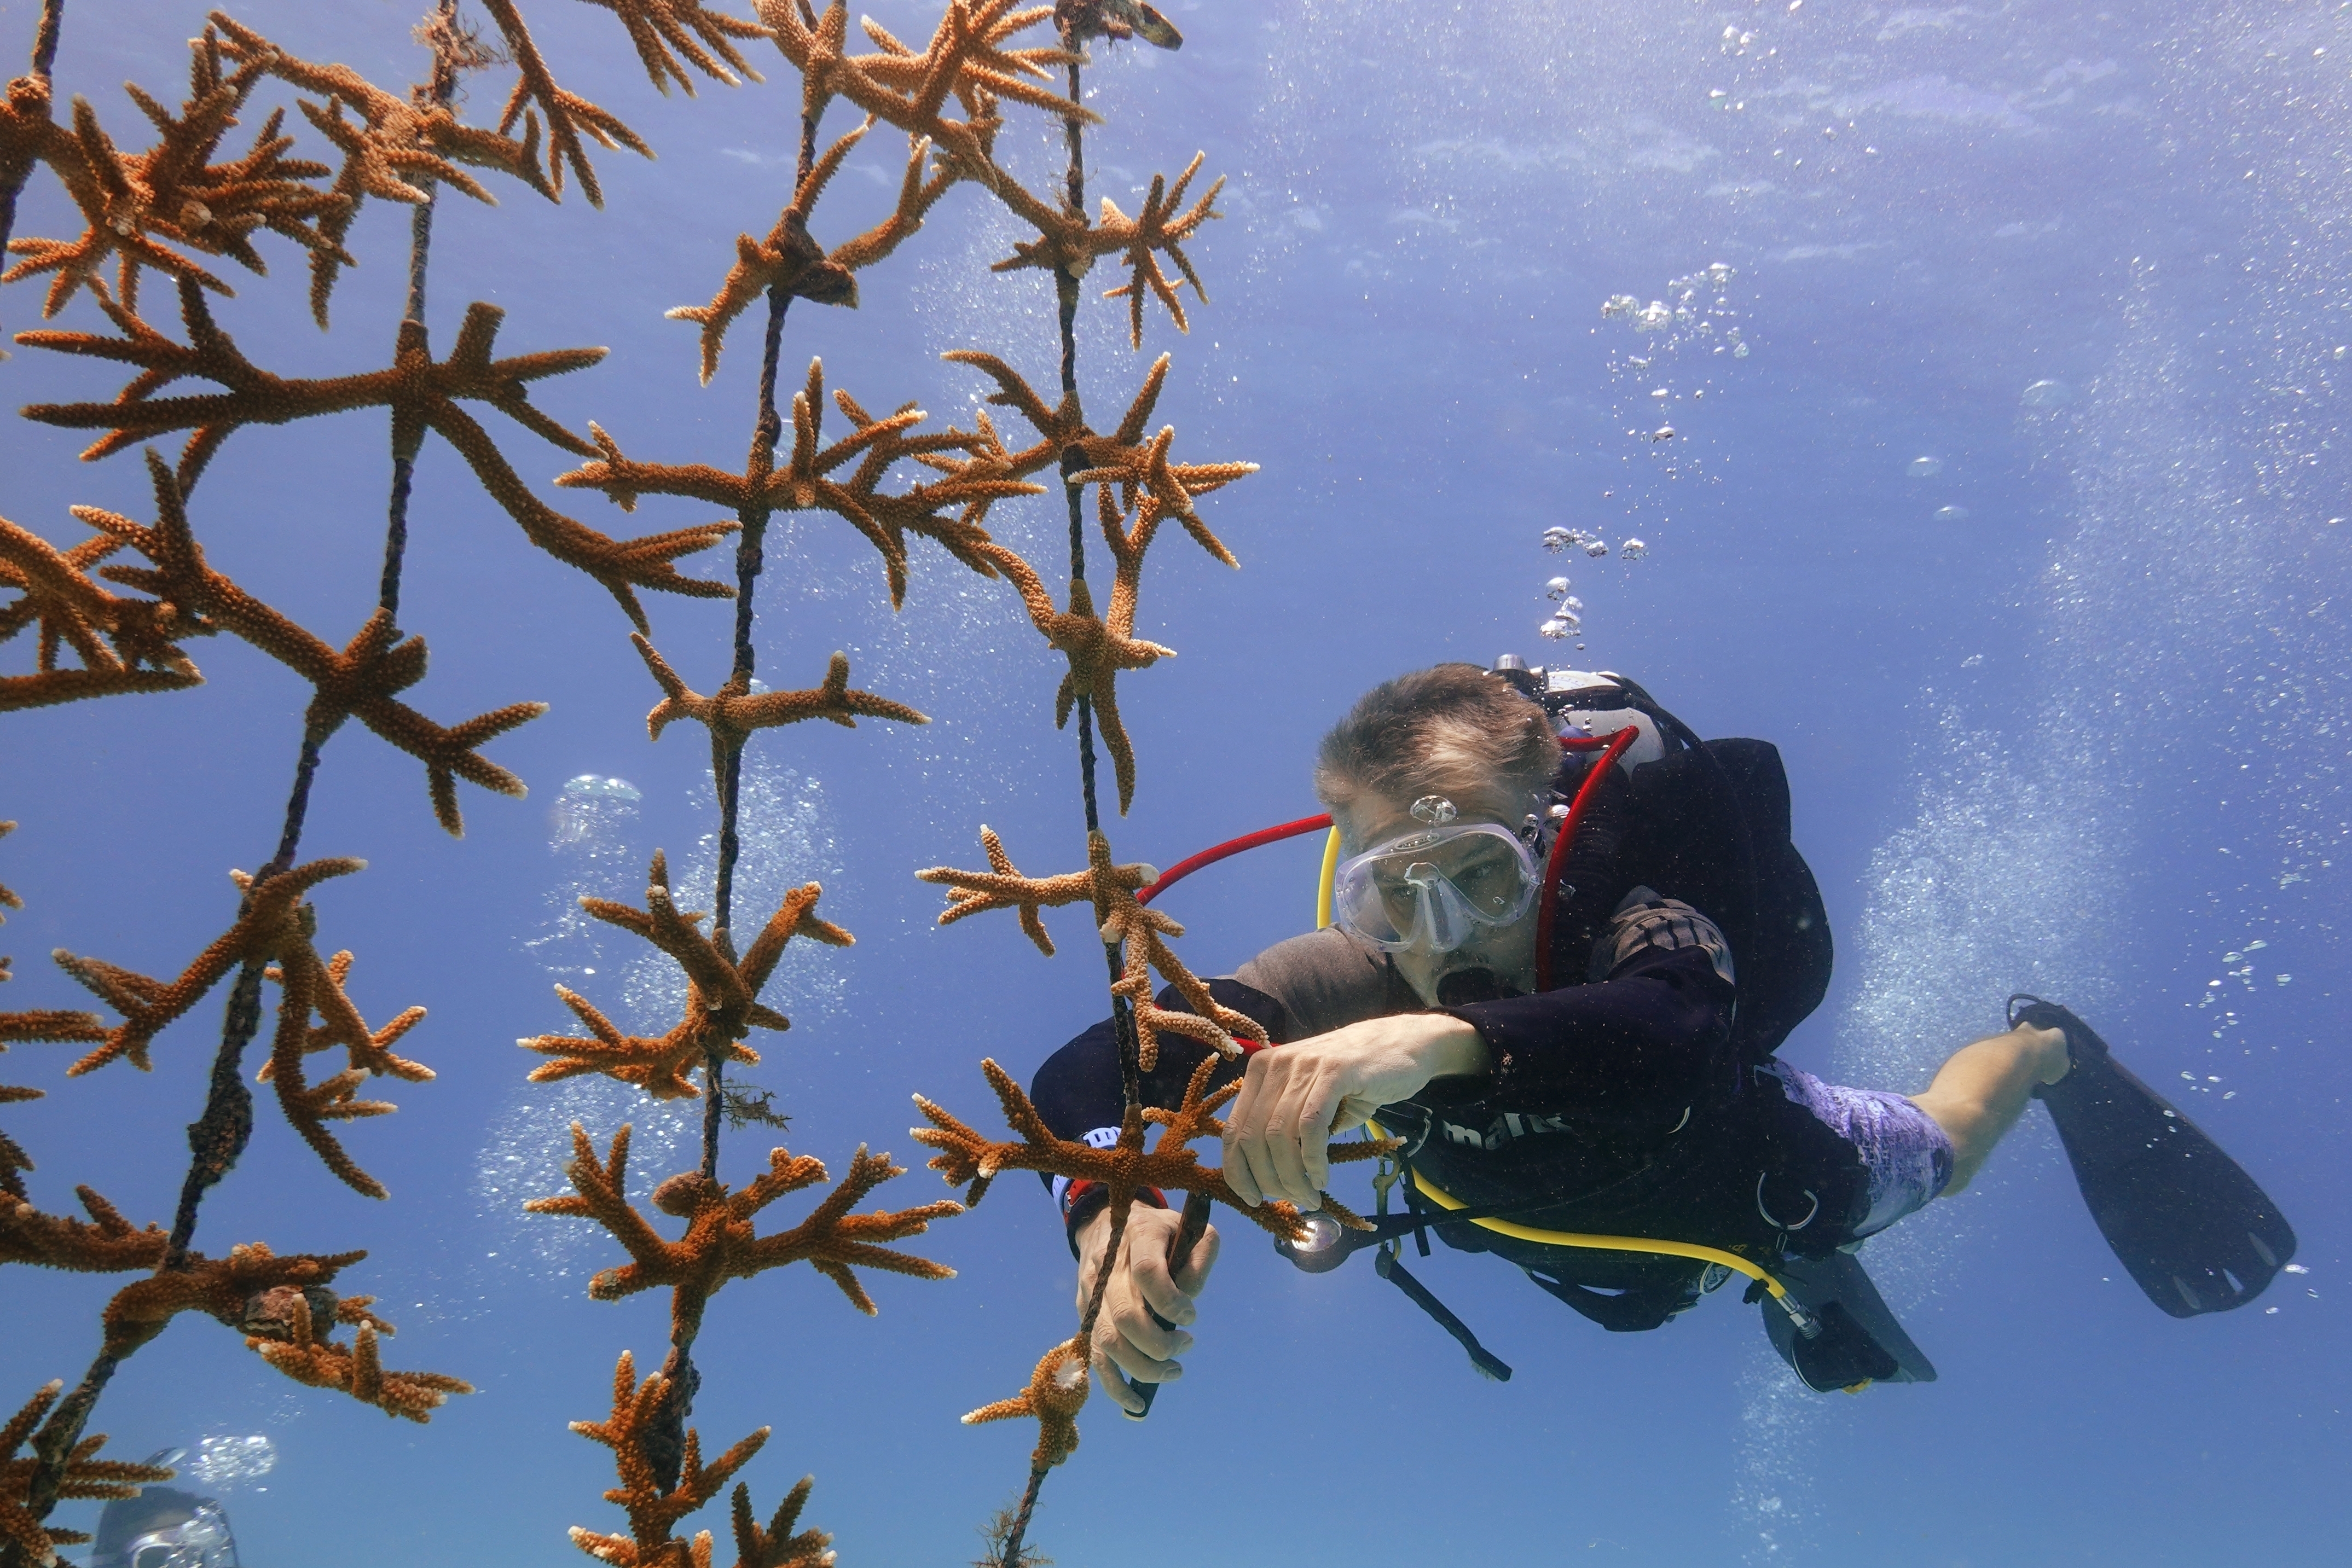 How One Company Is Restoring Coral To Combat Climate Change's